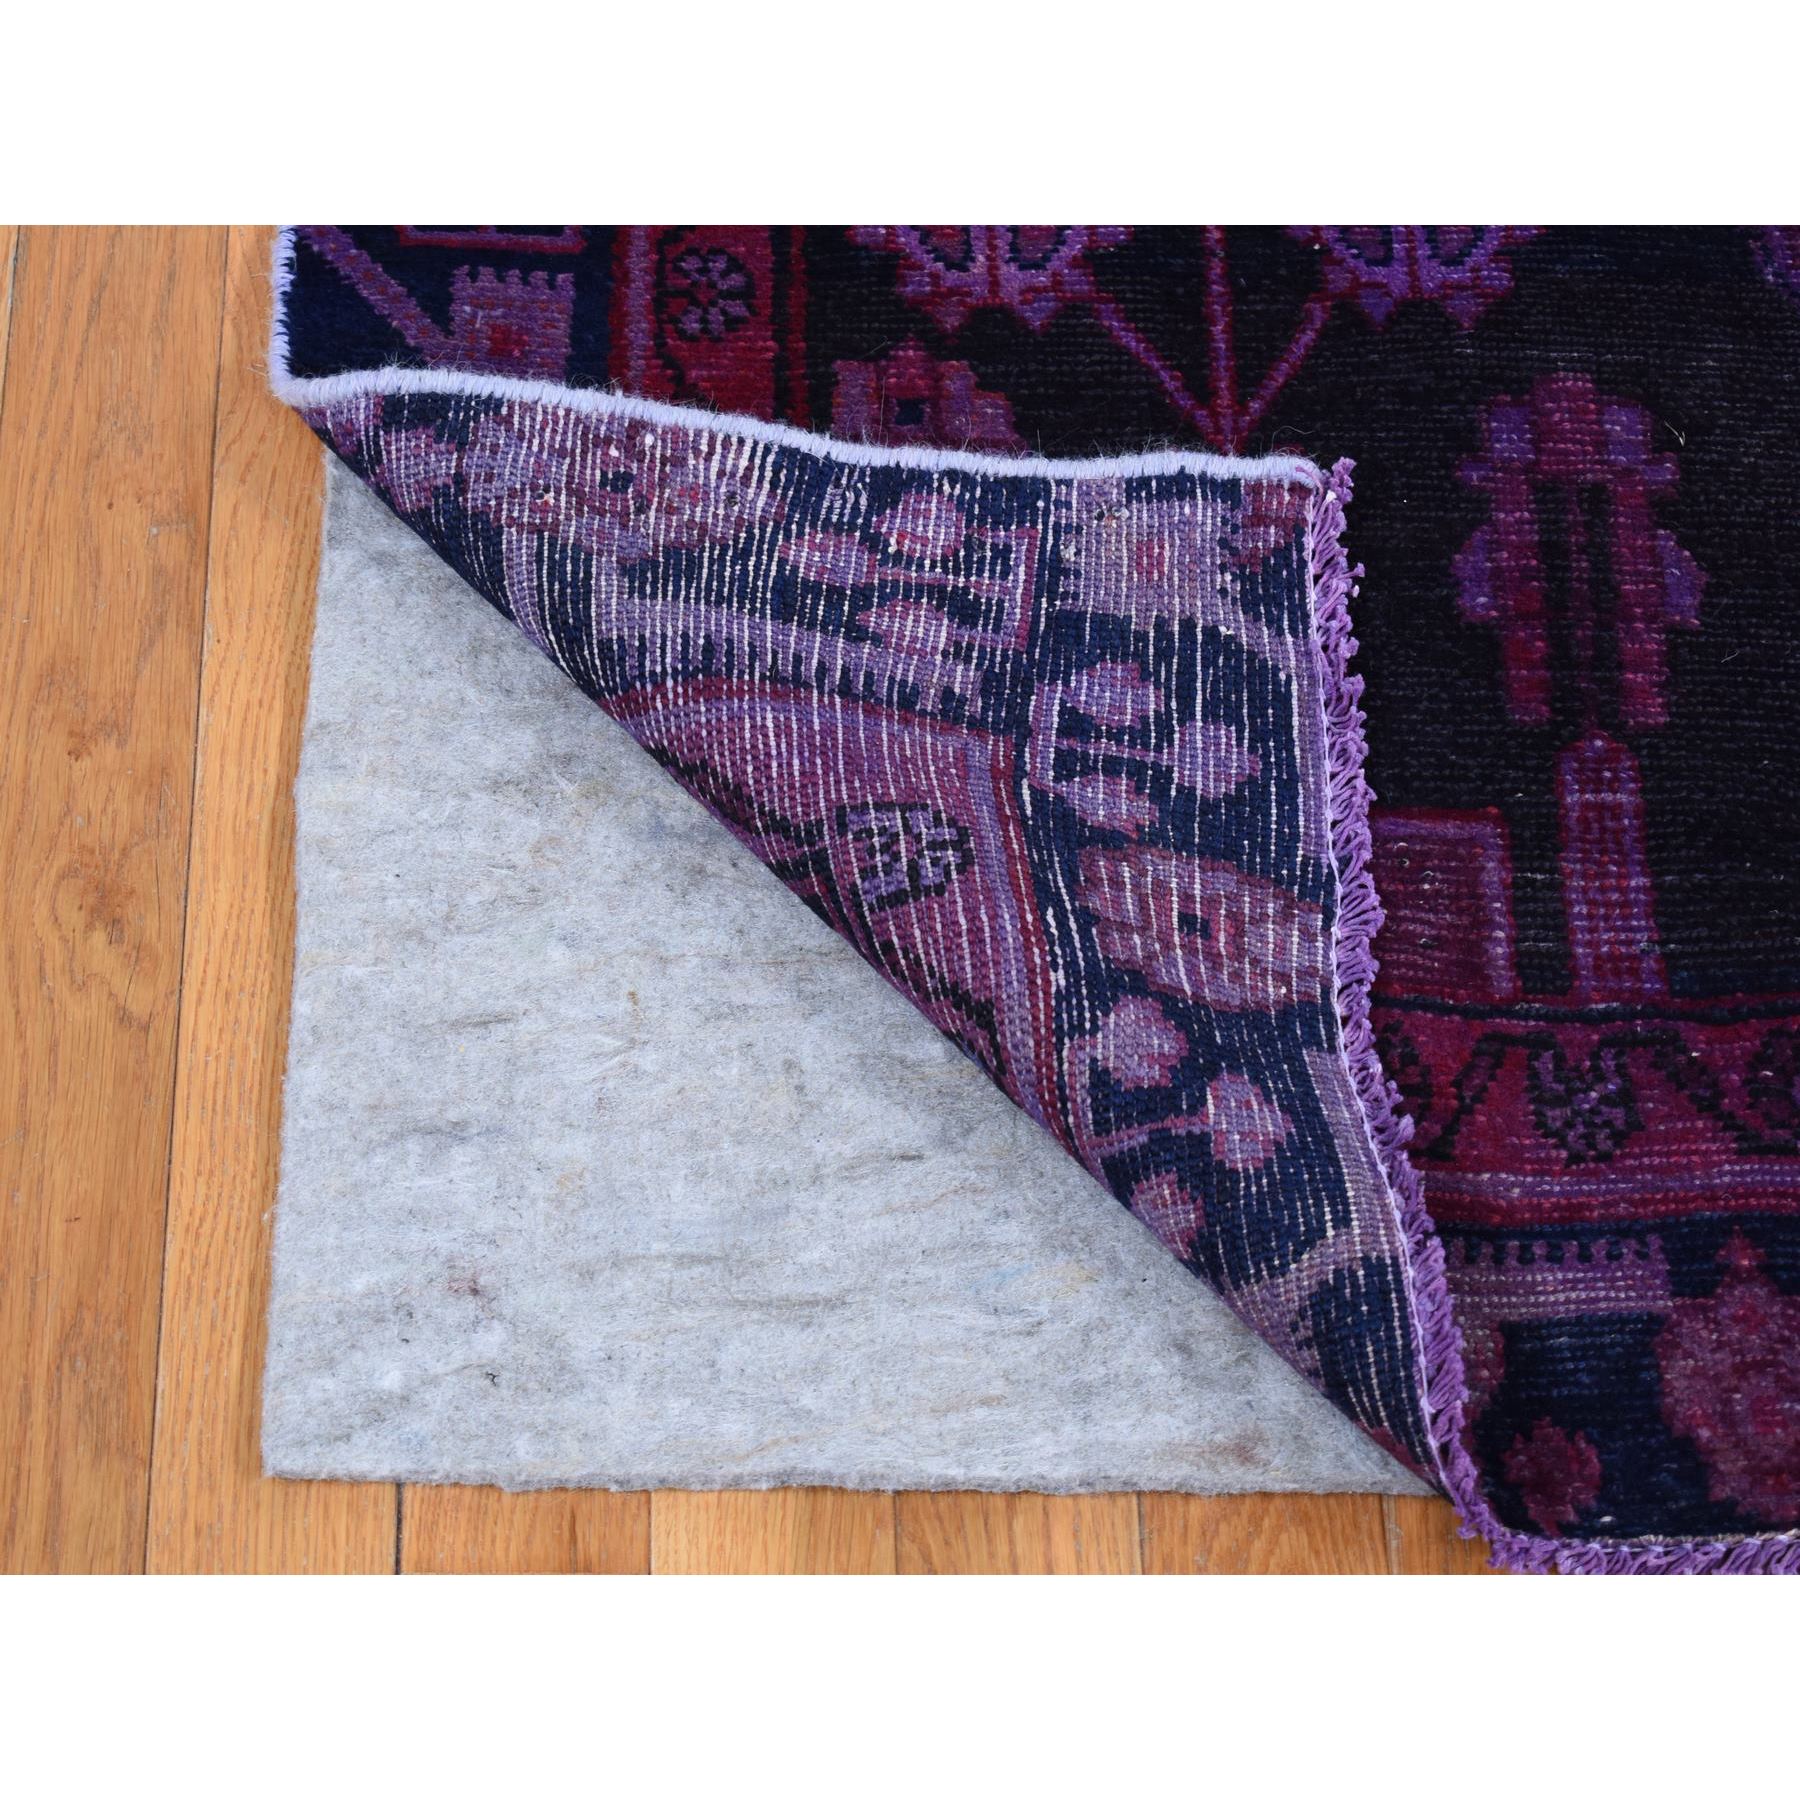  Wool Hand-Knotted Area Rug 4'6